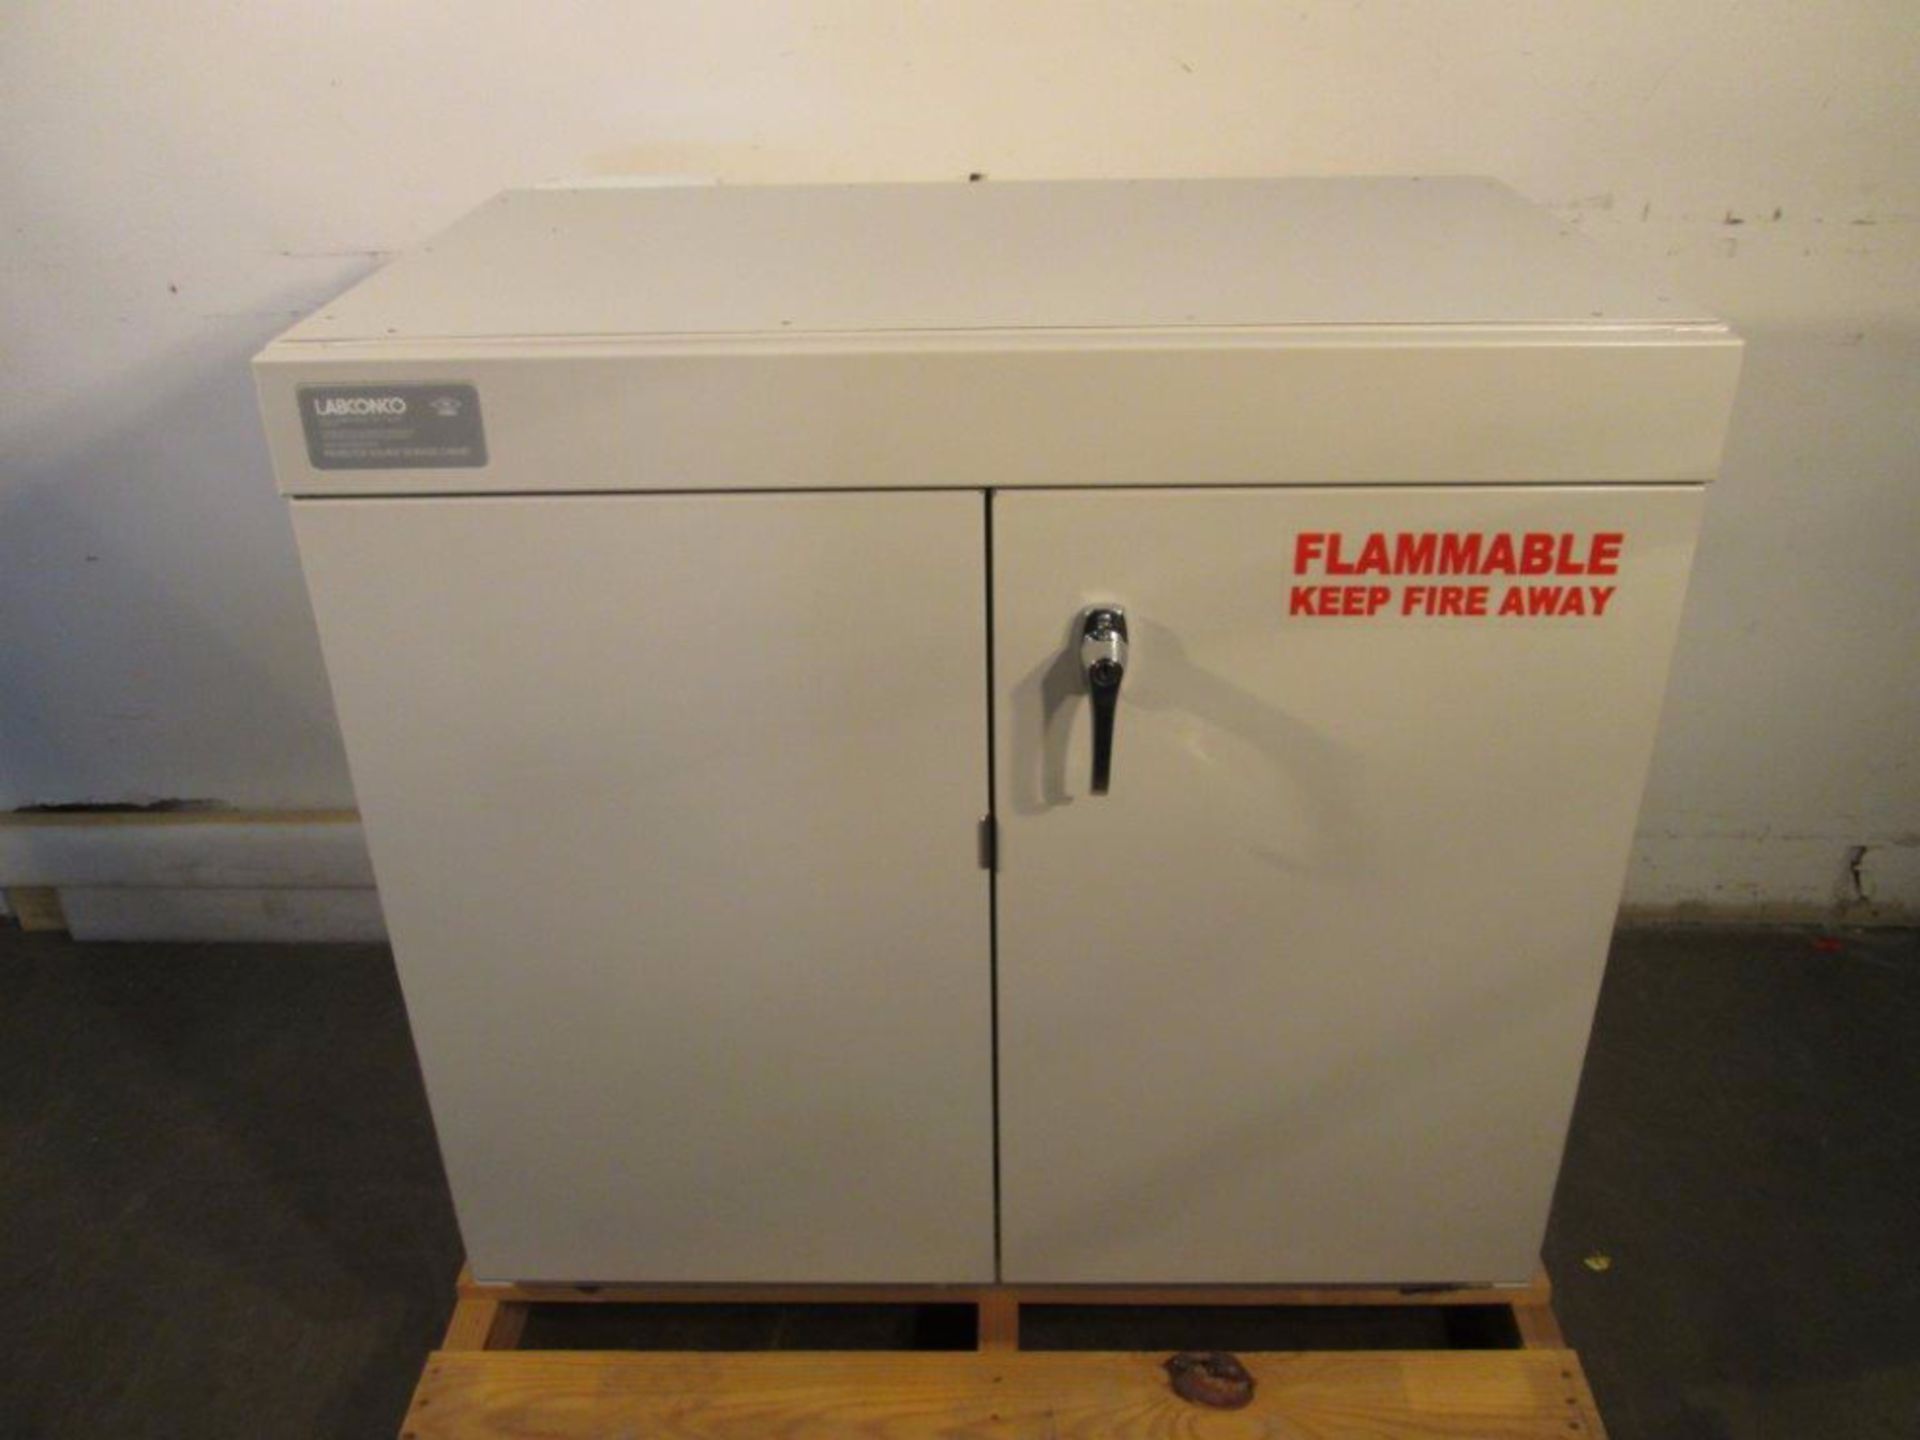 Labconco 30 Gallon Flammable Solvent Storage Cabinet, Unopened